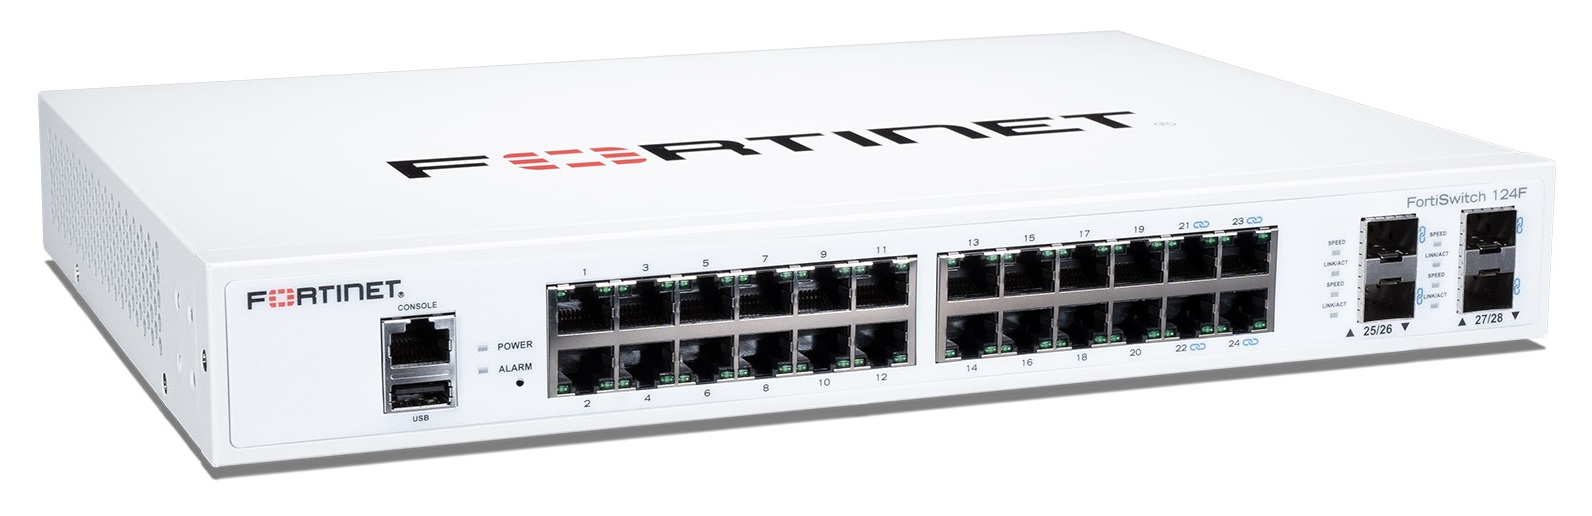 Layer 2 FortiGate switch controller compatible switch with 24 GE RJ45 + 4 10G SFP+ ports. Fanless